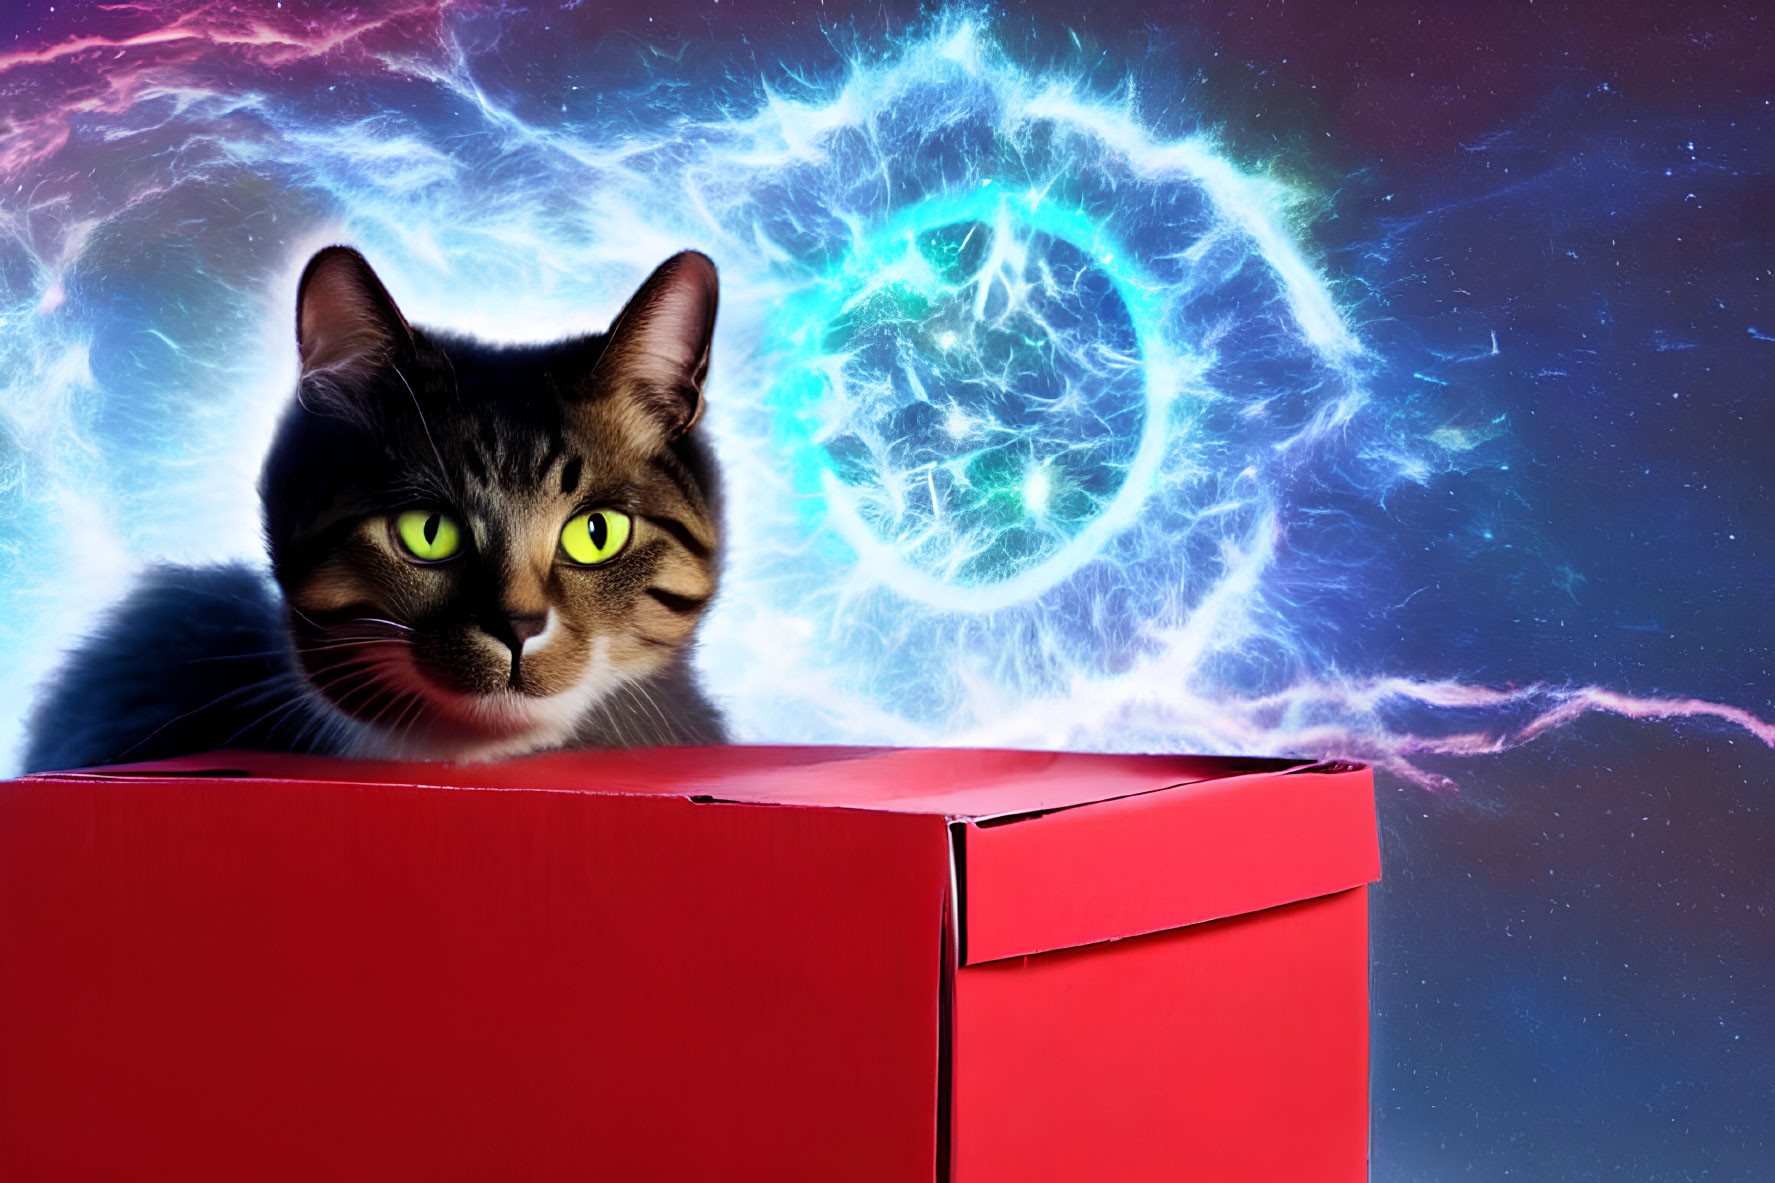 Tabby Cat with Yellow Eyes in Cosmic Setting against Red Box